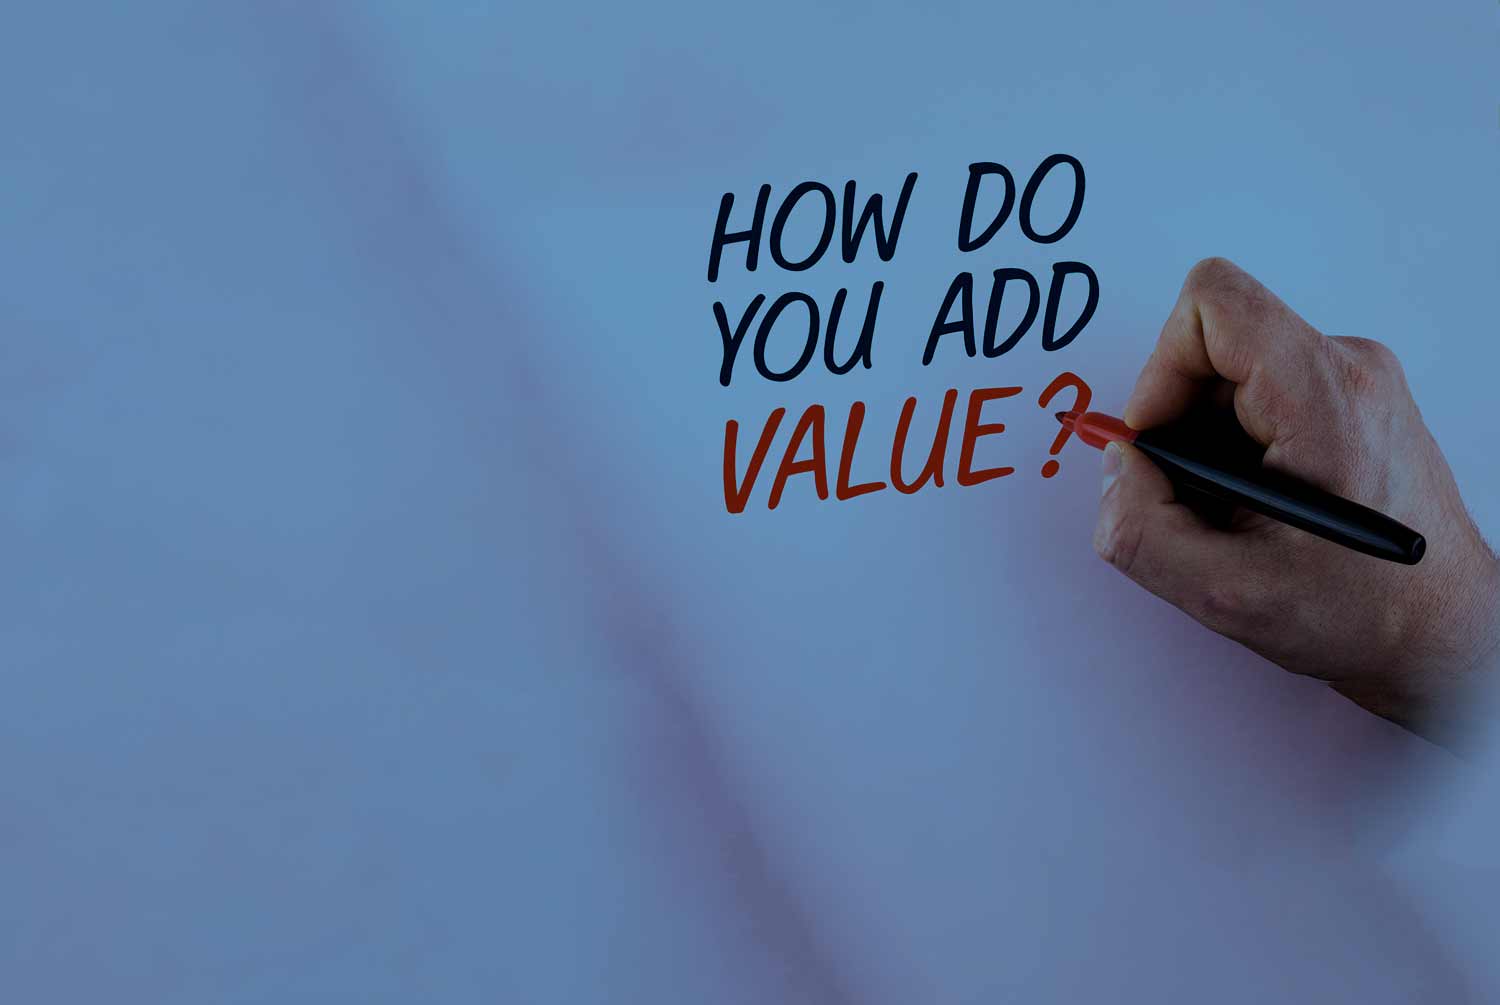 Building Value before you Sell your Business